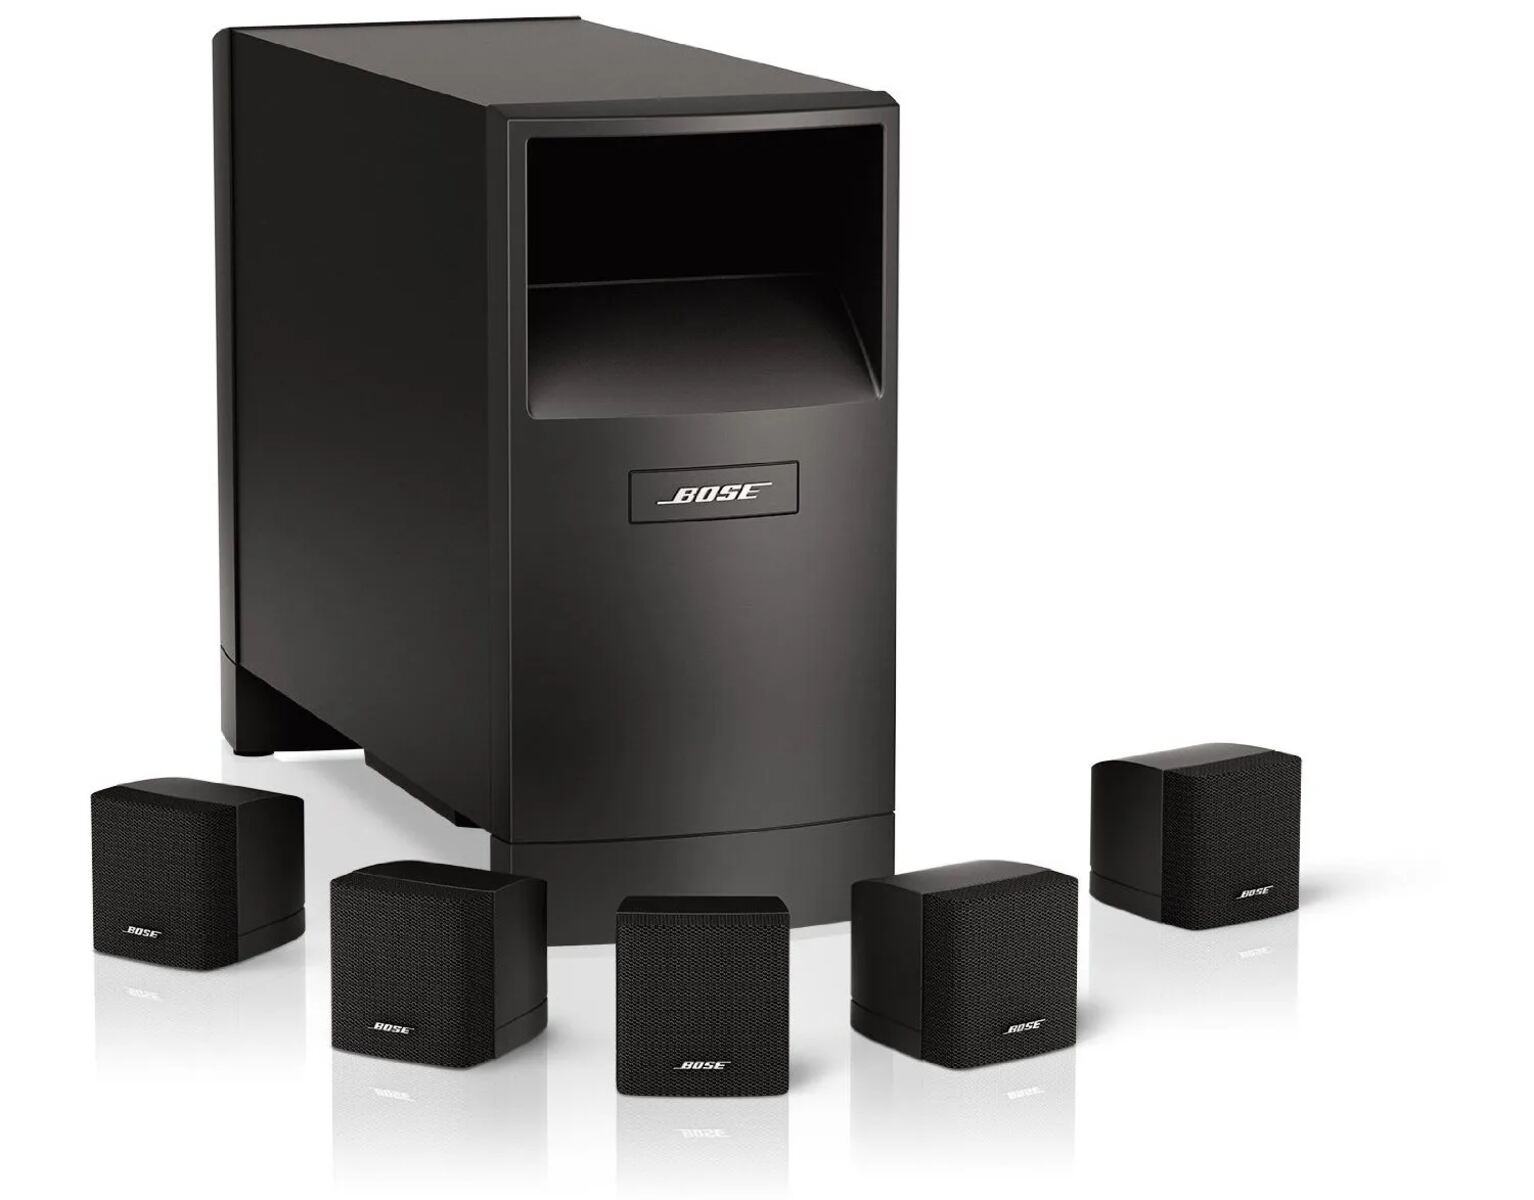 How To Hook Up Bose Surround Sound System To PC